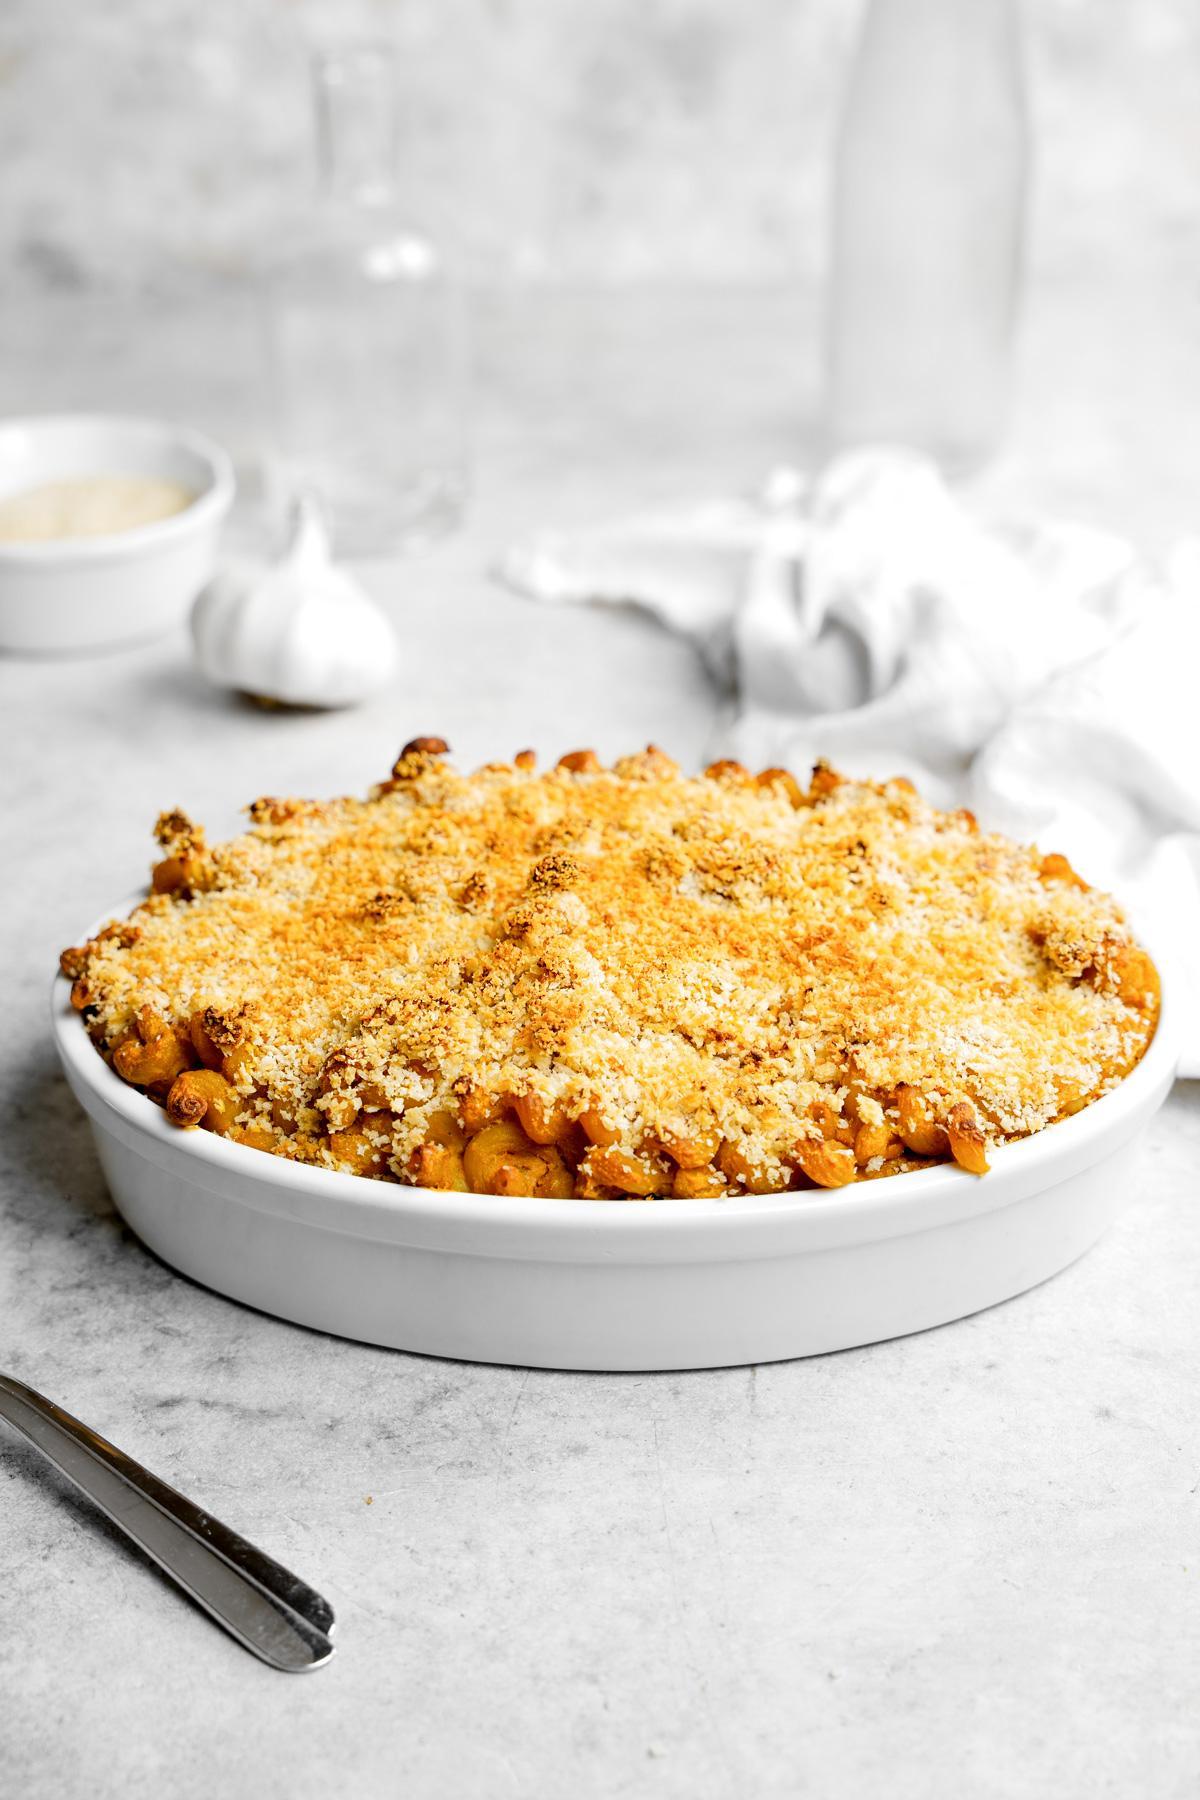 Sweet Potato Mac and cheese in a casserole dish with crispy bread crumbs on top